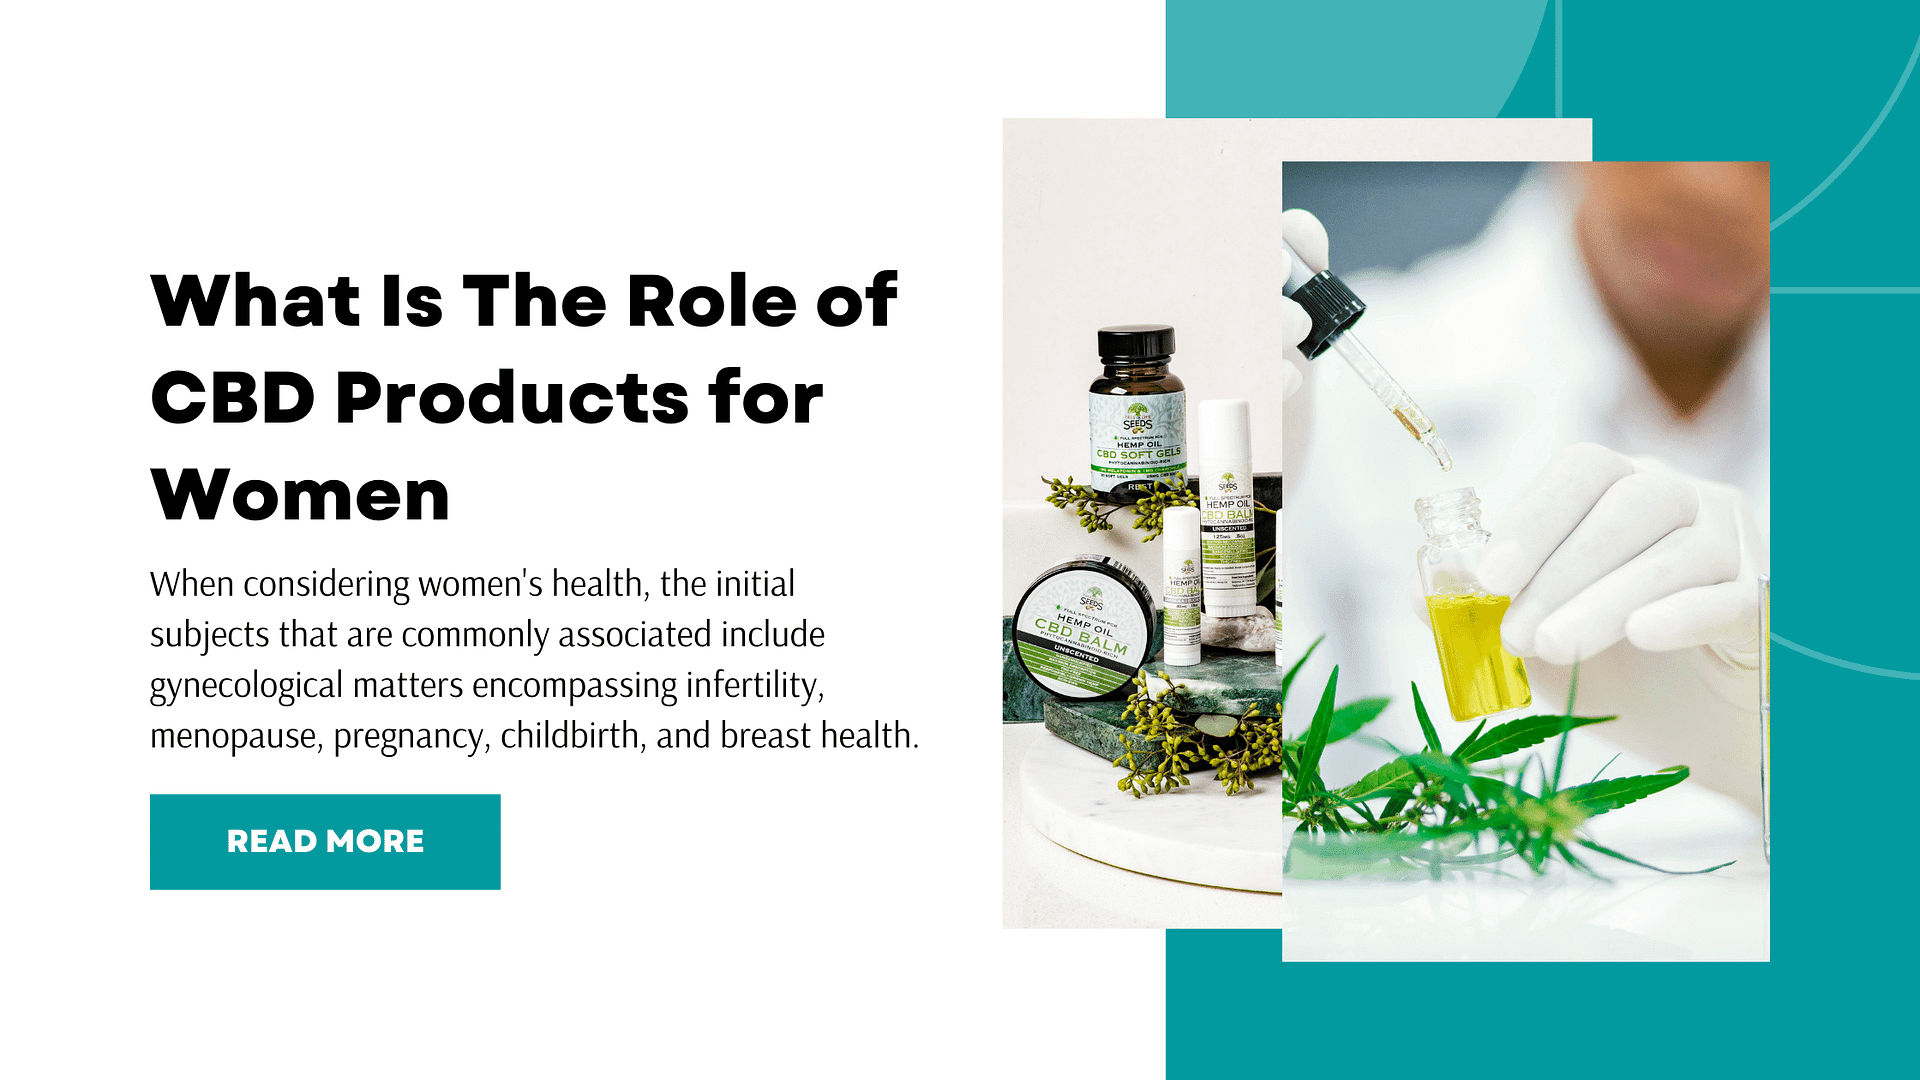 What Is The Role of CBD Products for Women